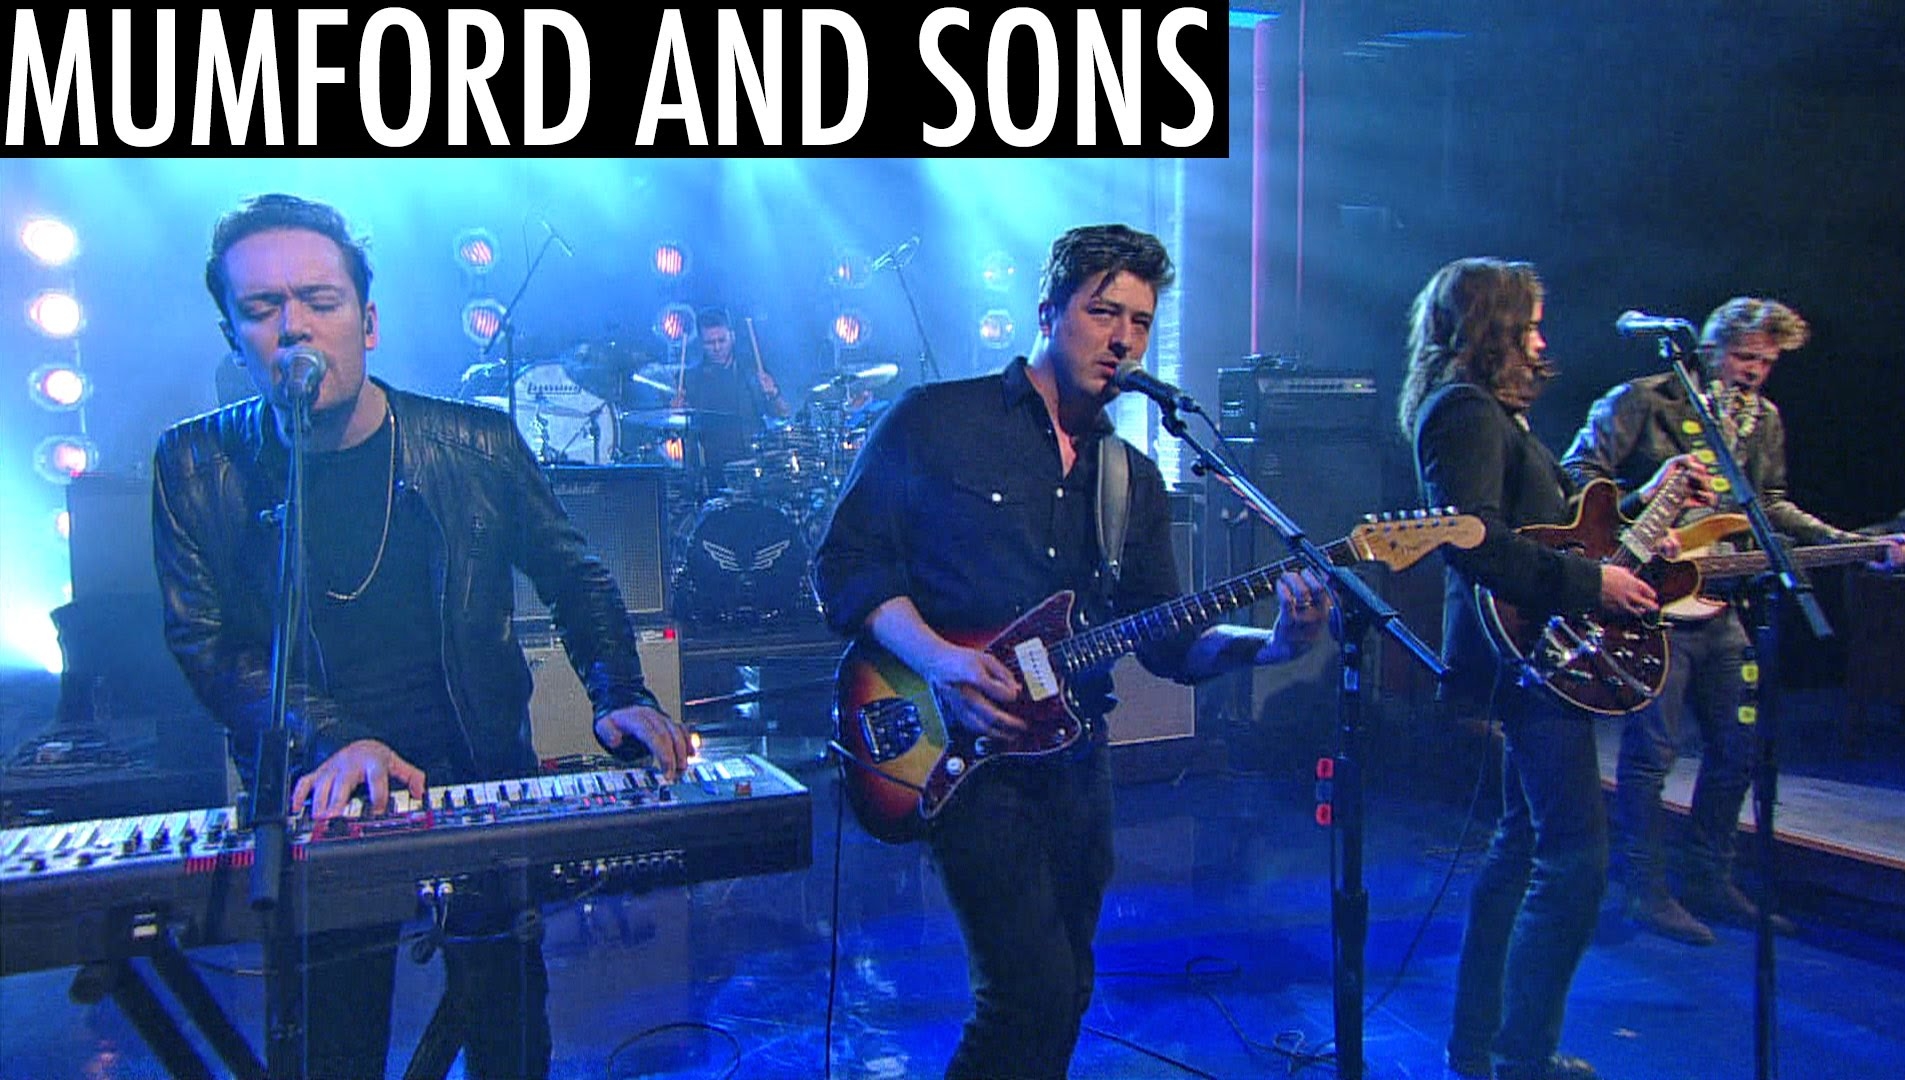 Video: Mumford and Sons on Letterman